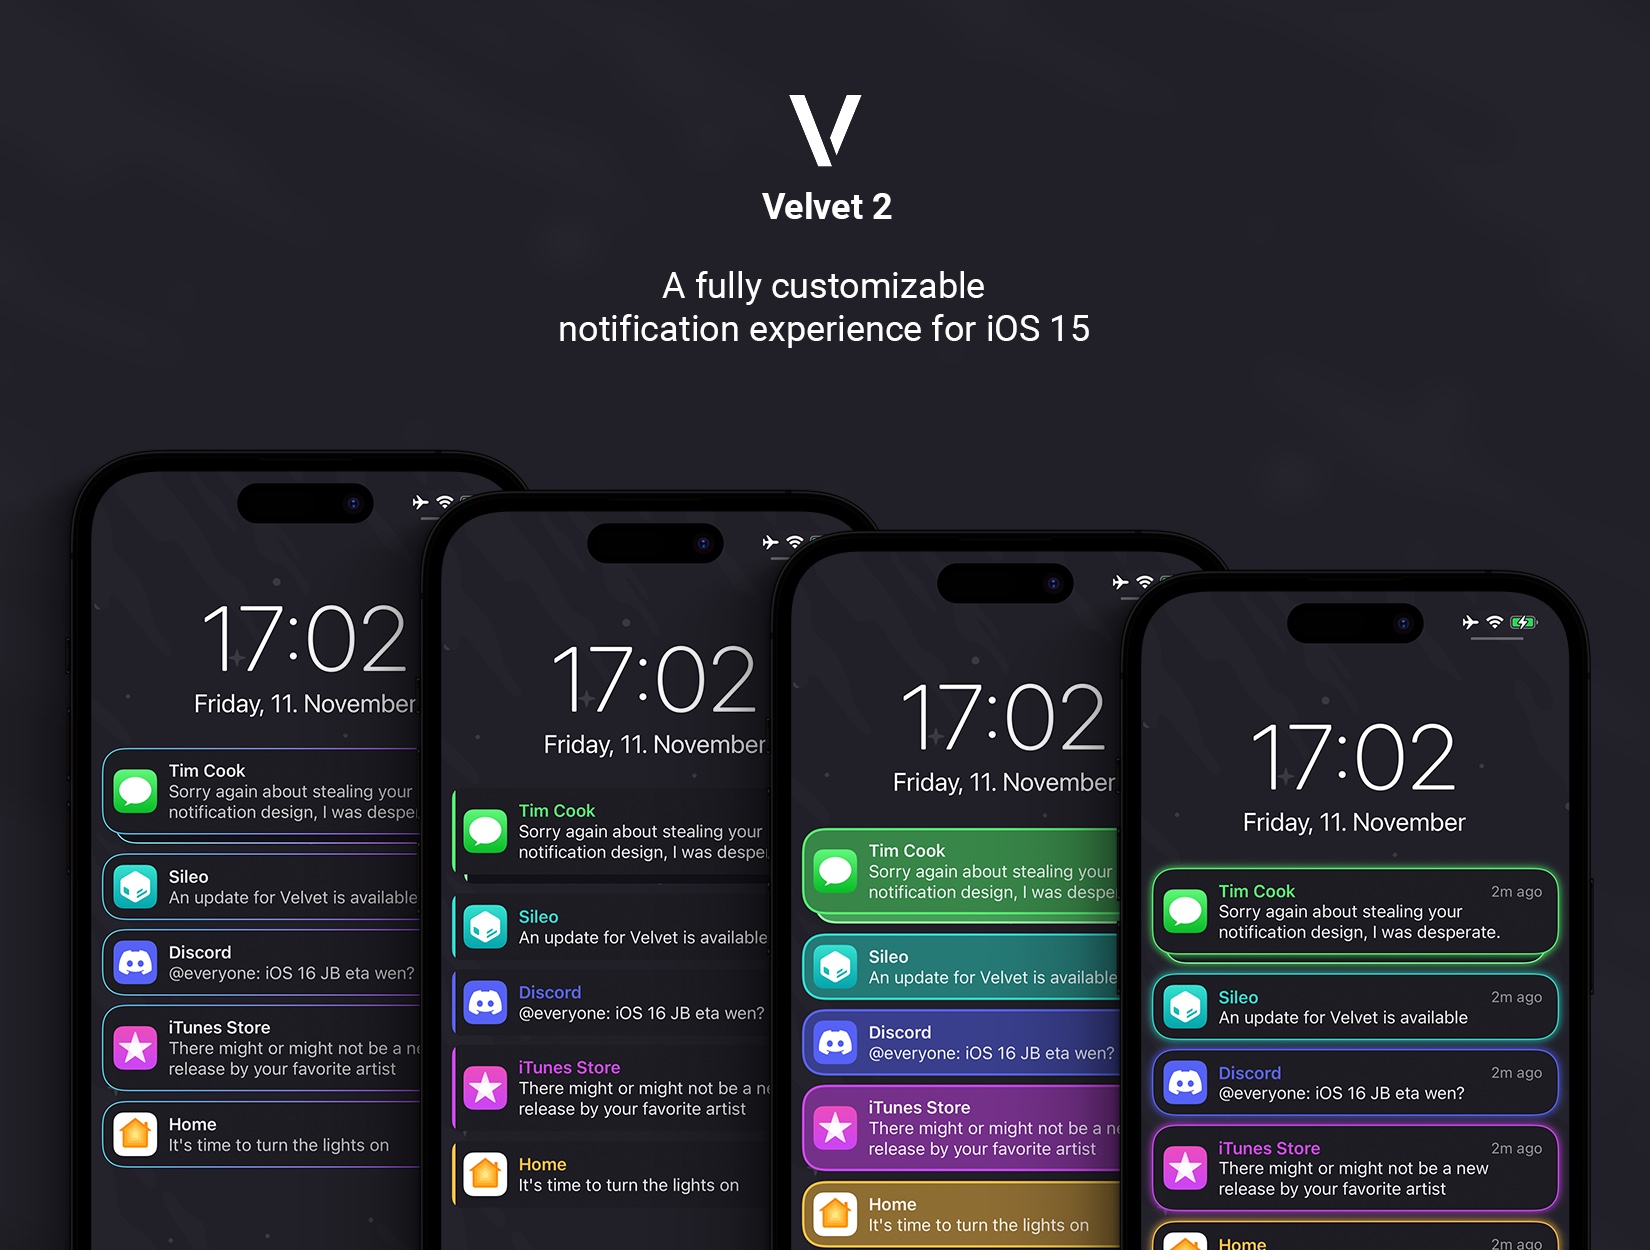 Velvet 2 brings advanced banner notification colorization options to jailbroken iOS 15 devices